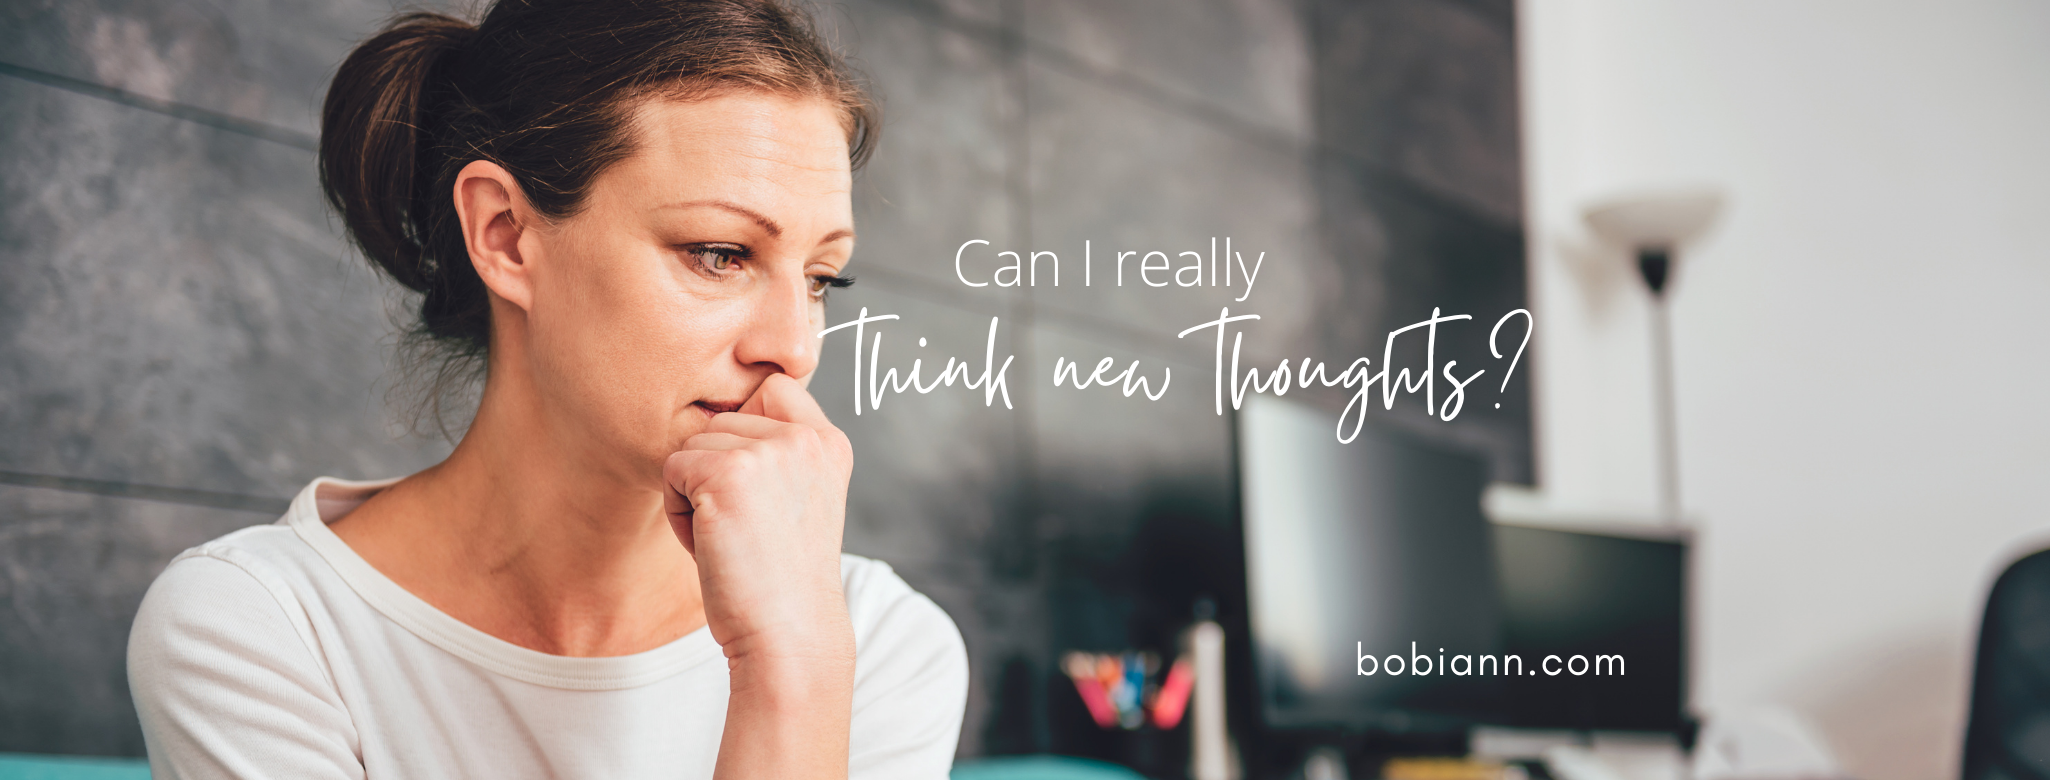 can I think new thoughts?